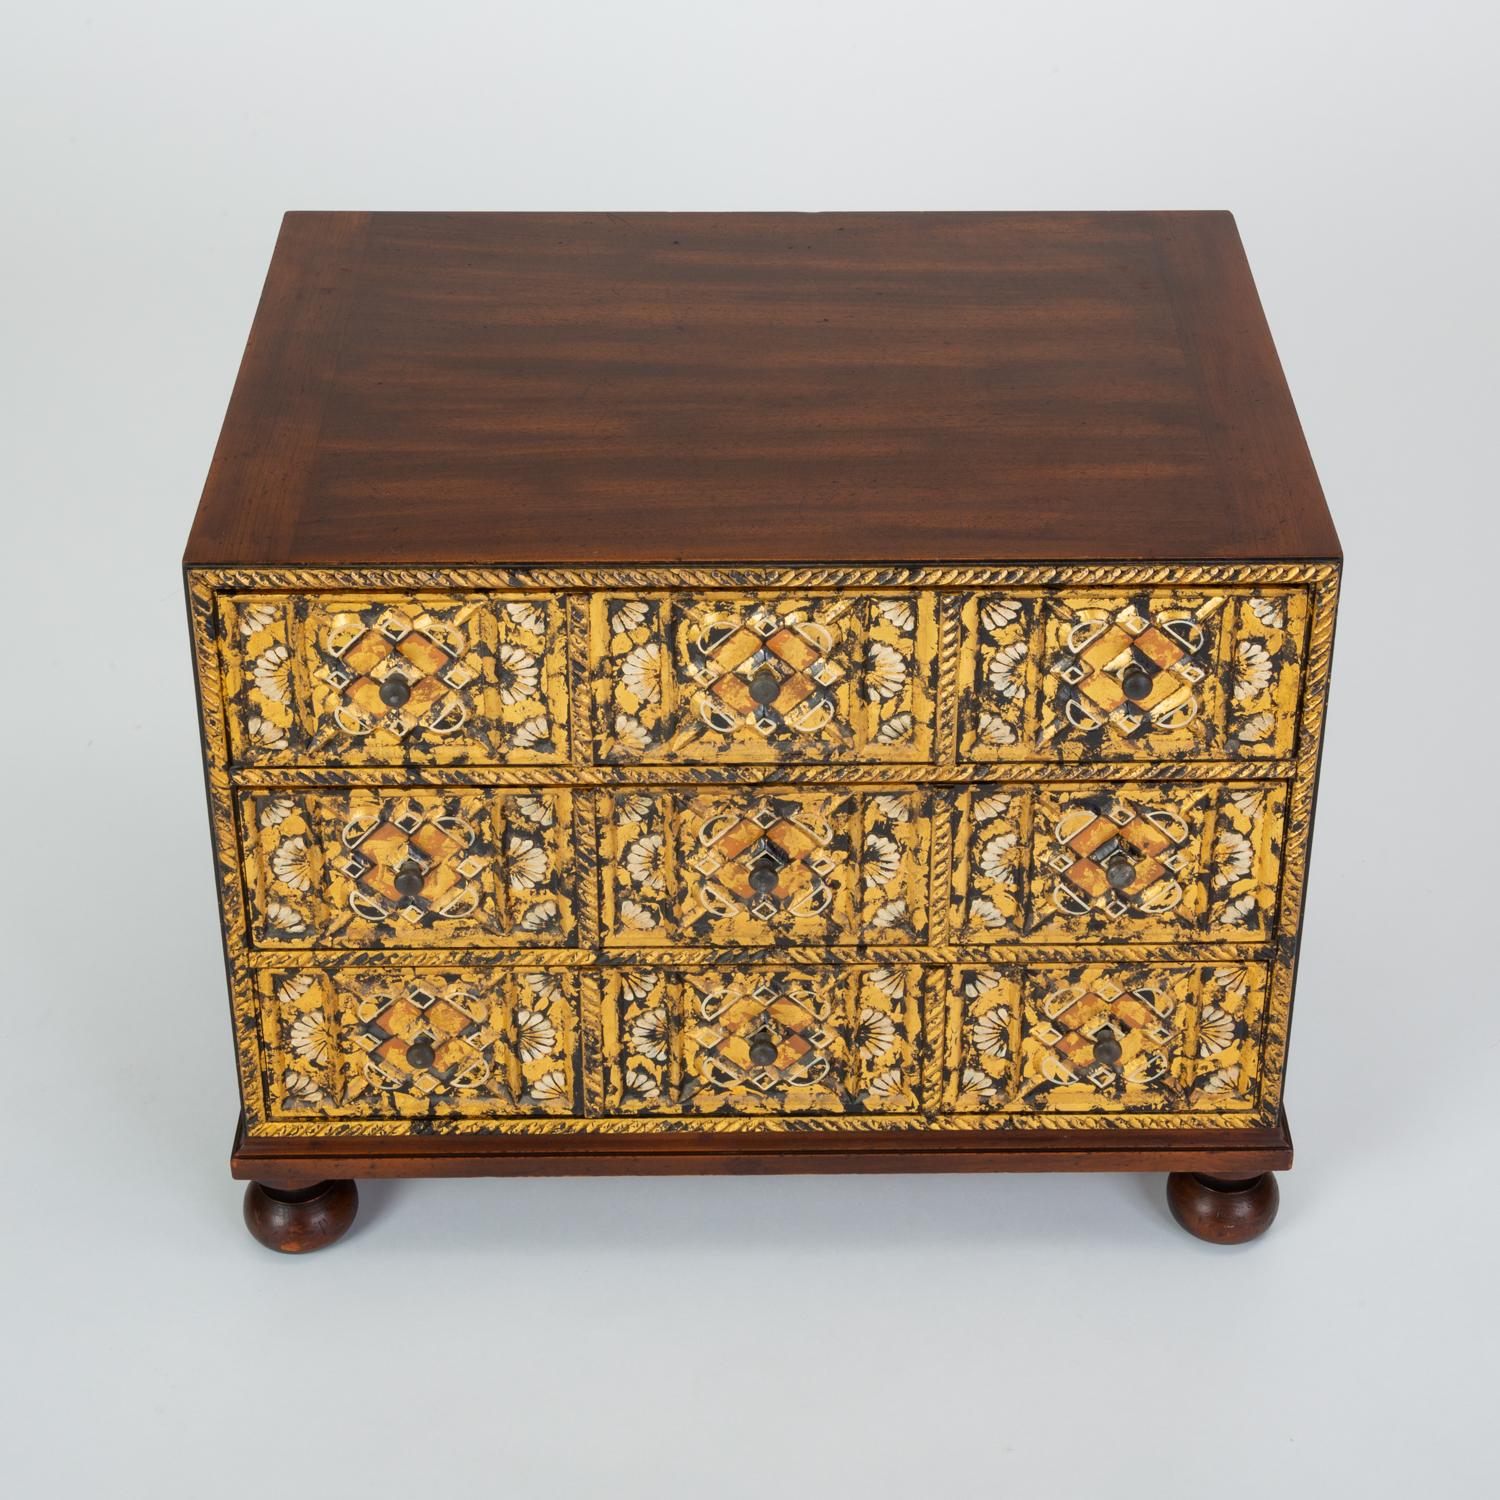 A small chest of drawers or side cabinet in Spanish Renaissance Revival style by Grand Rapids manufacturer John Widdicomb. Made originally by a Widdicomb subsidiary, William A. Berkey, this example is likely from the mid-1970s when the Berkey name